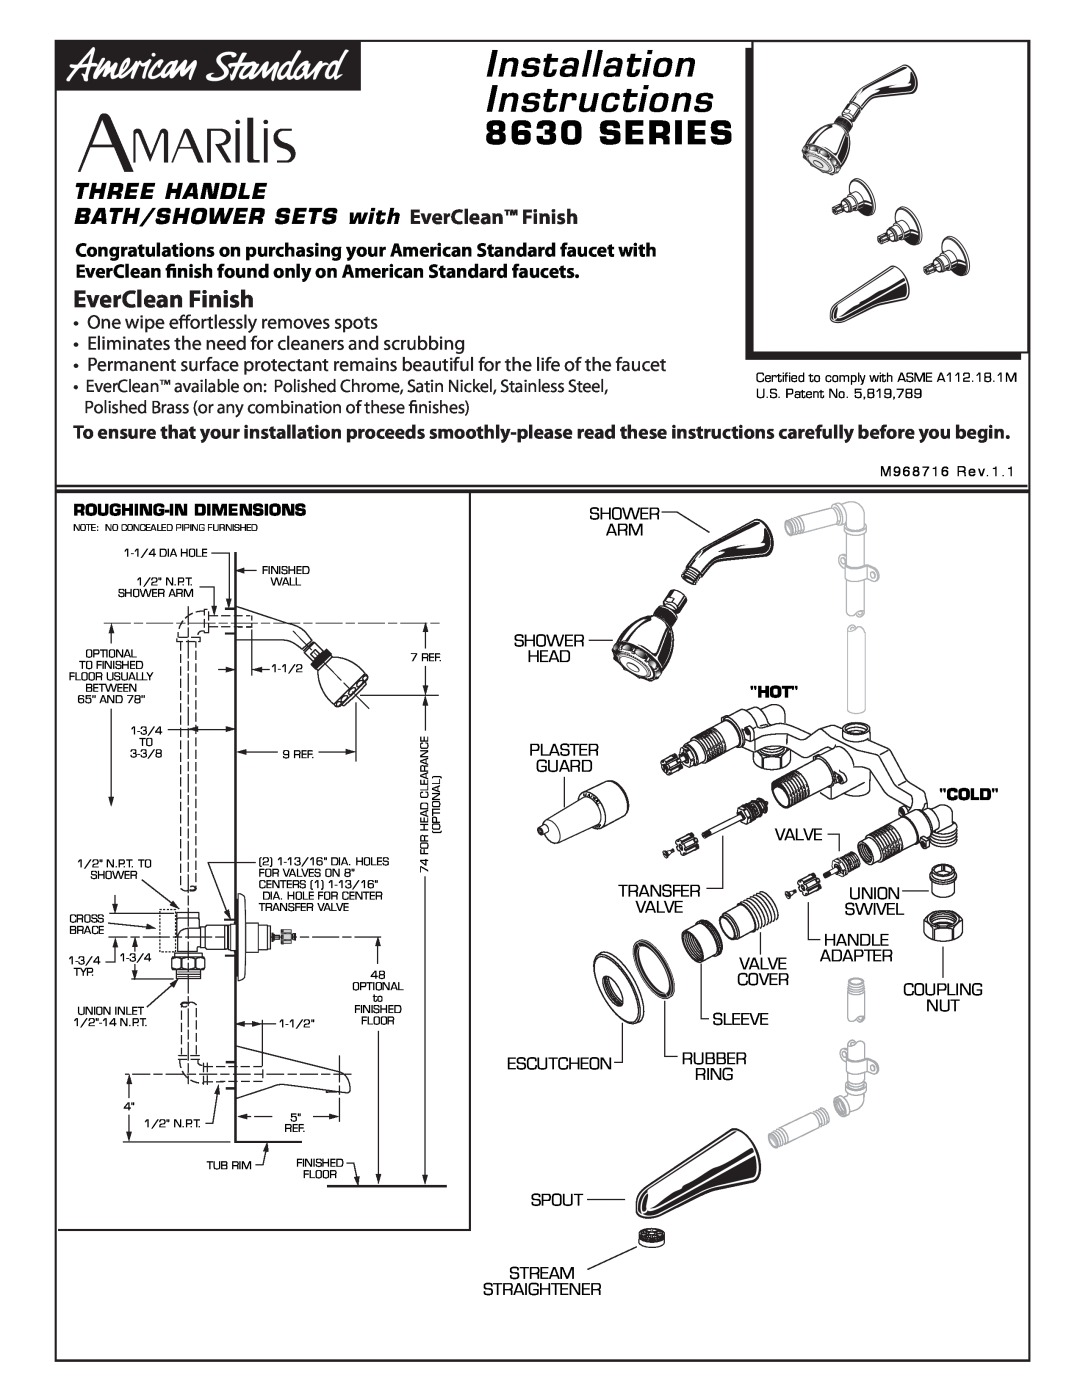 American Standard 8630 Series installation instructions Roughing-In Dimensions, Cold, Installation Instructions 